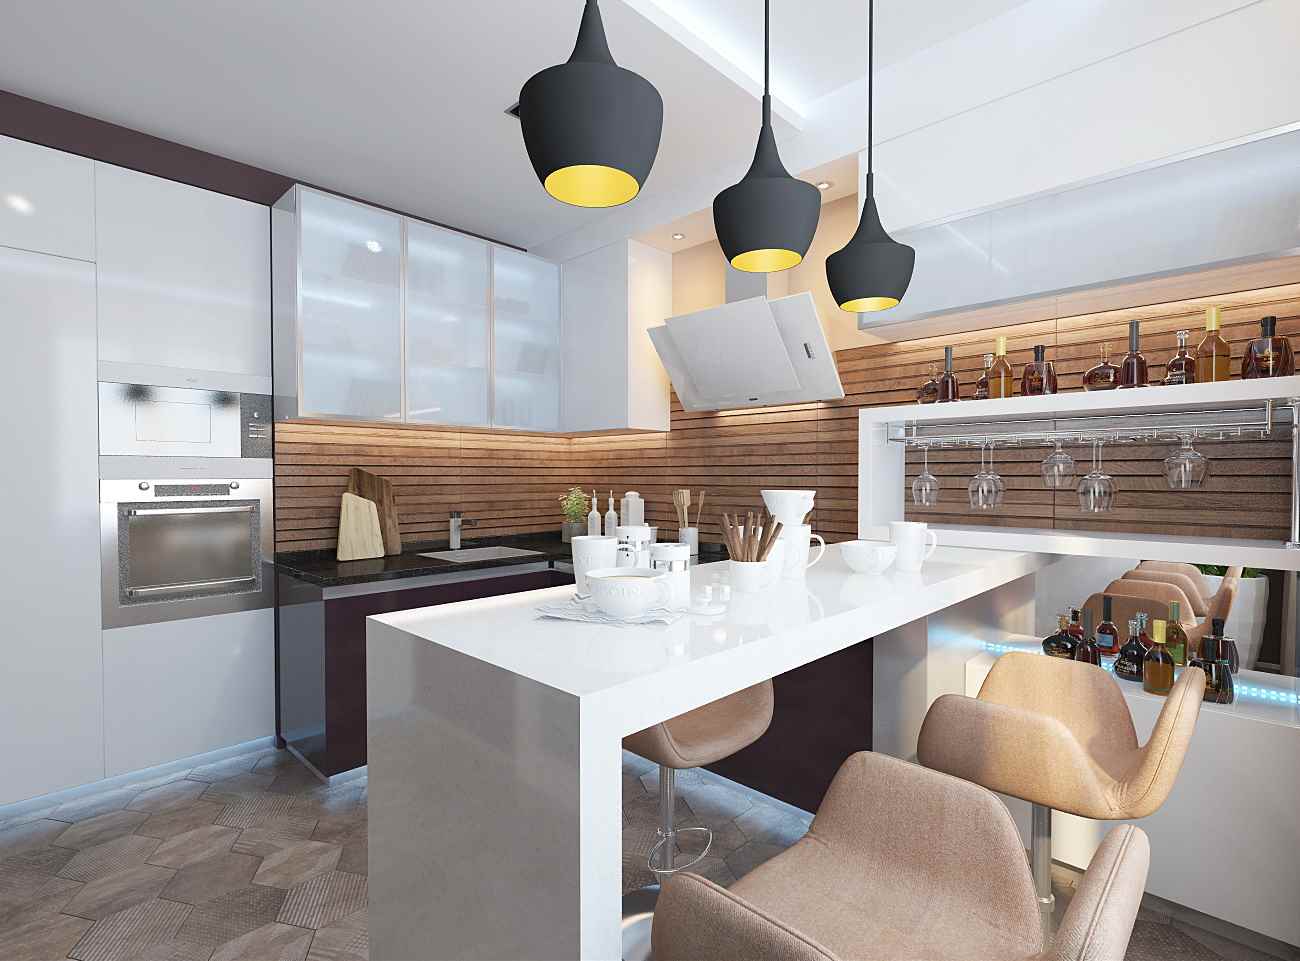 the idea of ​​an unusual interior of the kitchen is 13 sq.m